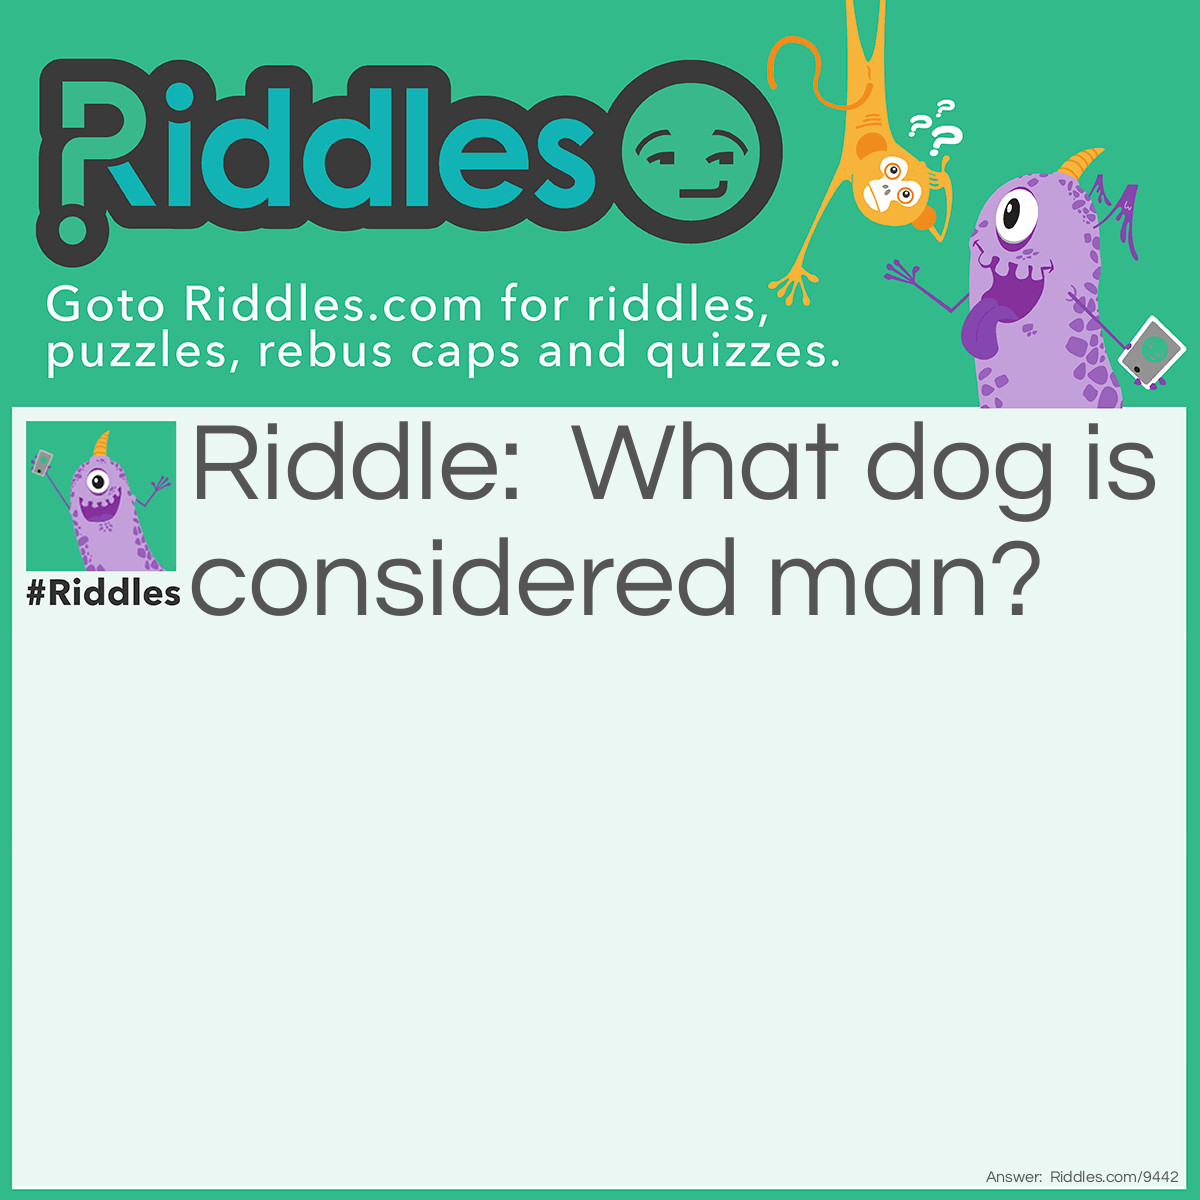 Riddle: What dog is considered man? Answer: A police dog.